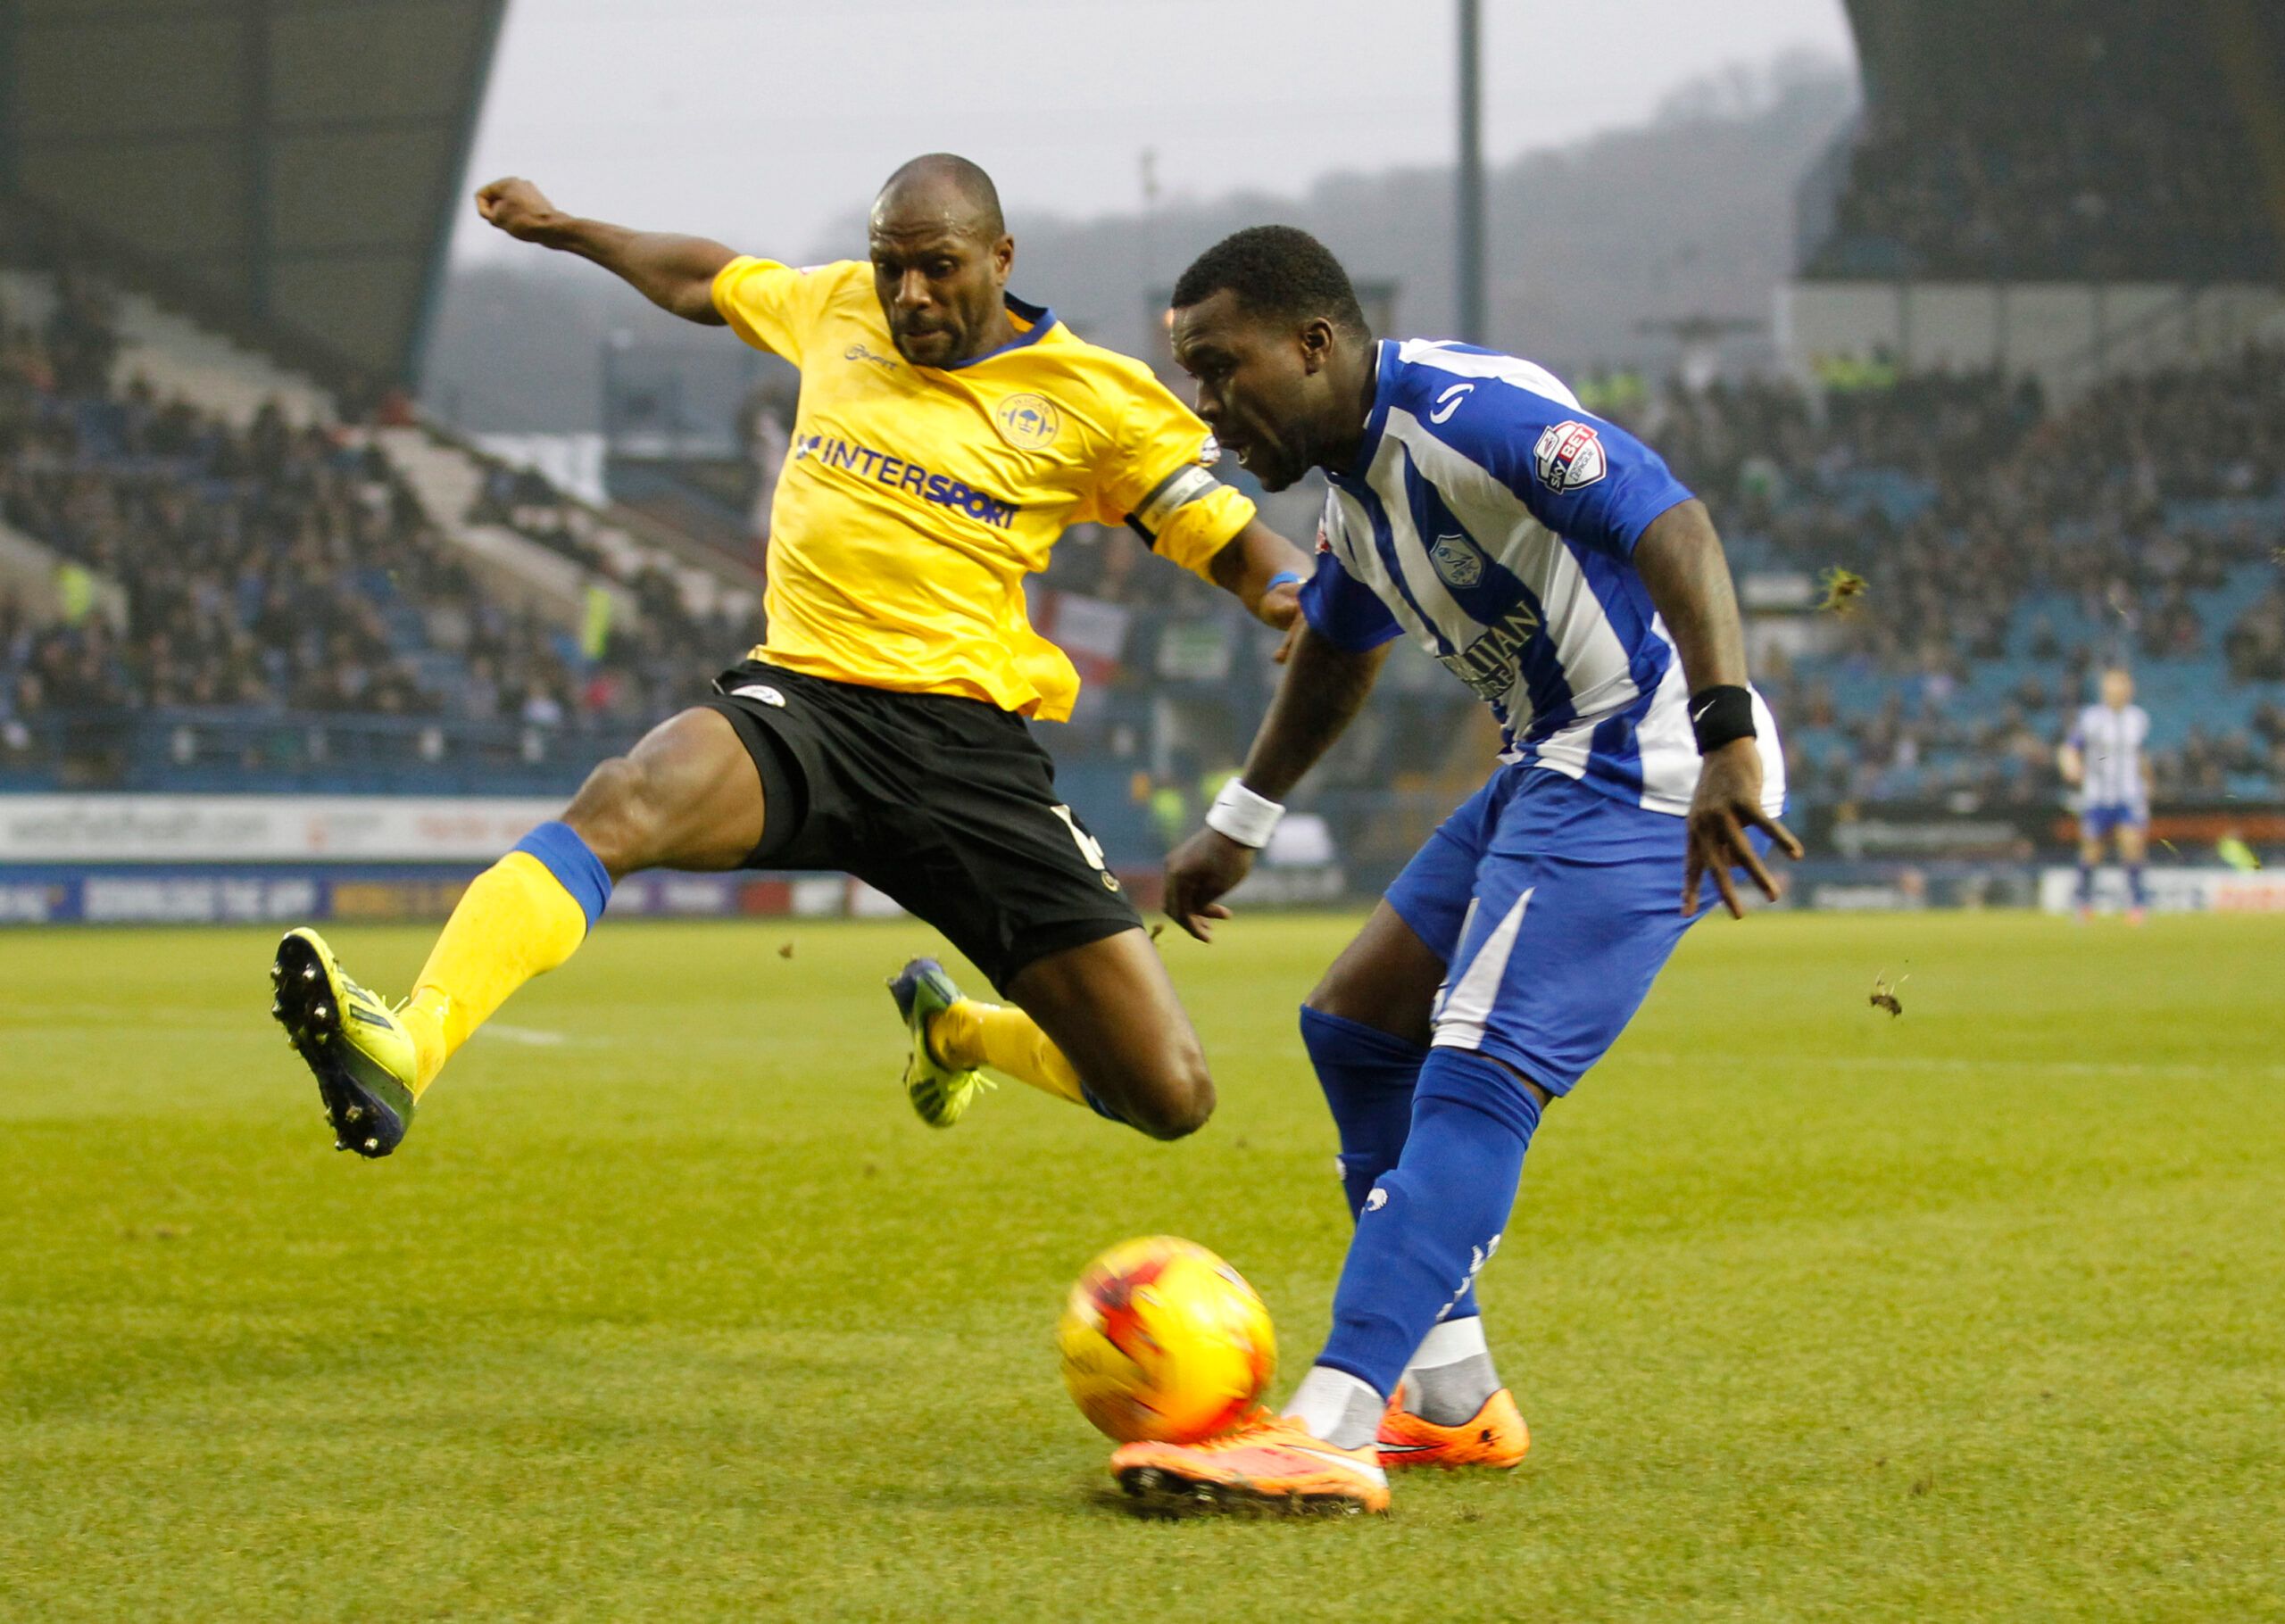 Football - Sheffield Wednesday v Wigan Athletic - Sky Bet Football League Championship - Hillsborough - 14/15 - 29/11/14 
Wigan's Emmerson Boyce in action against Sheffield Wednesday's Royston Drenthe  
Mandatory Credit: Action Images / John Clifton 
EDITORIAL USE ONLY. No use with unauthorized audio, video, data, fixture lists, club/league logos or 